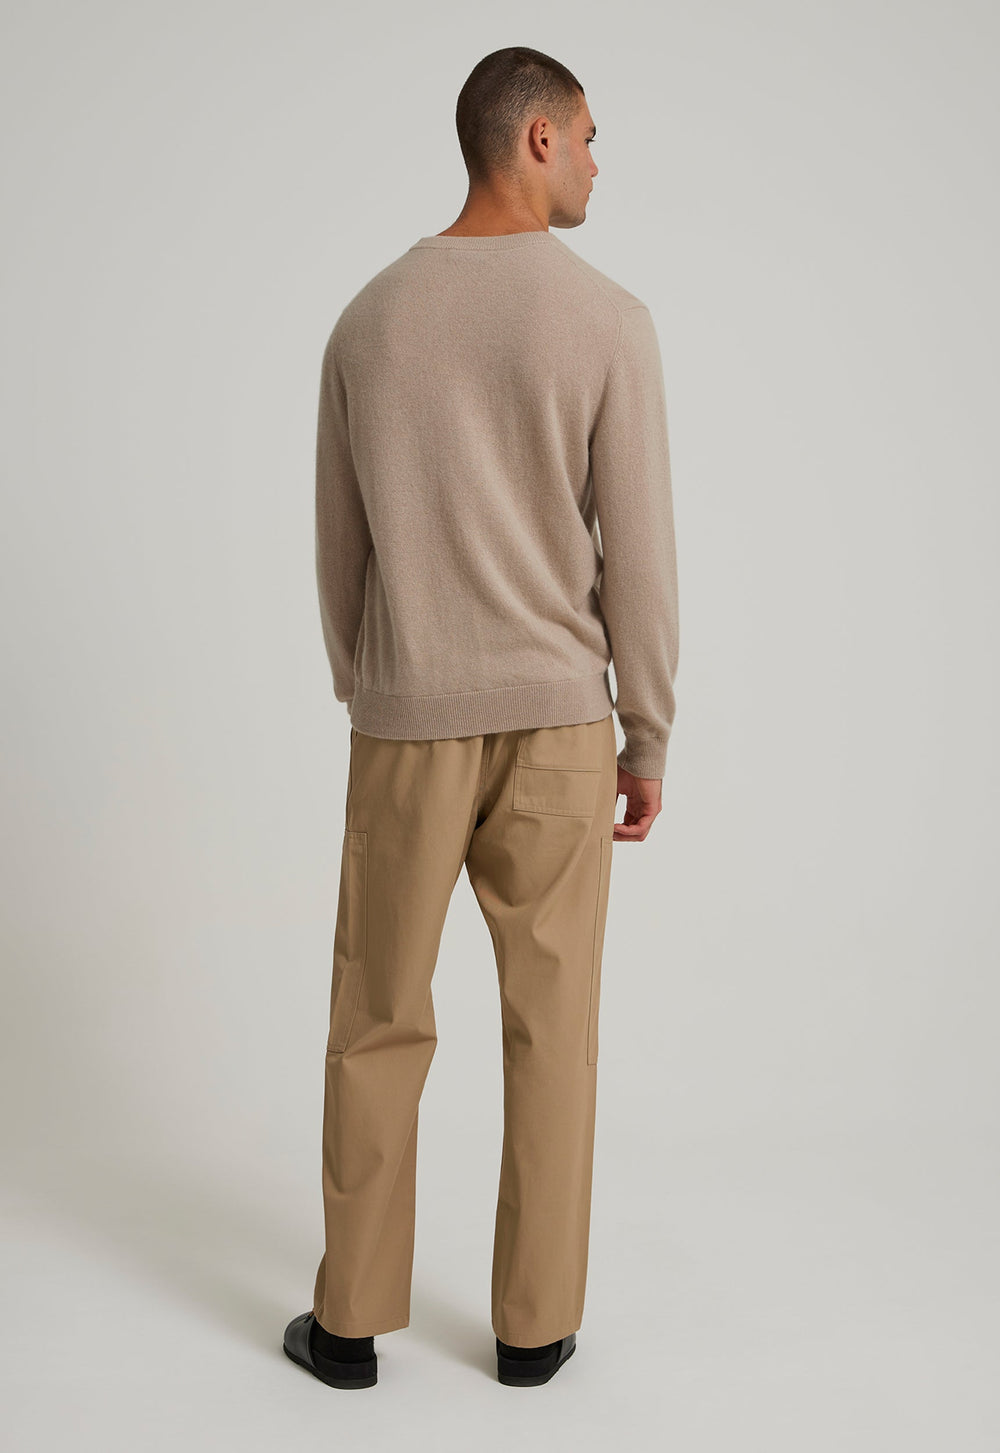 Jac+Jack BECKHAM CASHMERE SWEATER in Canas